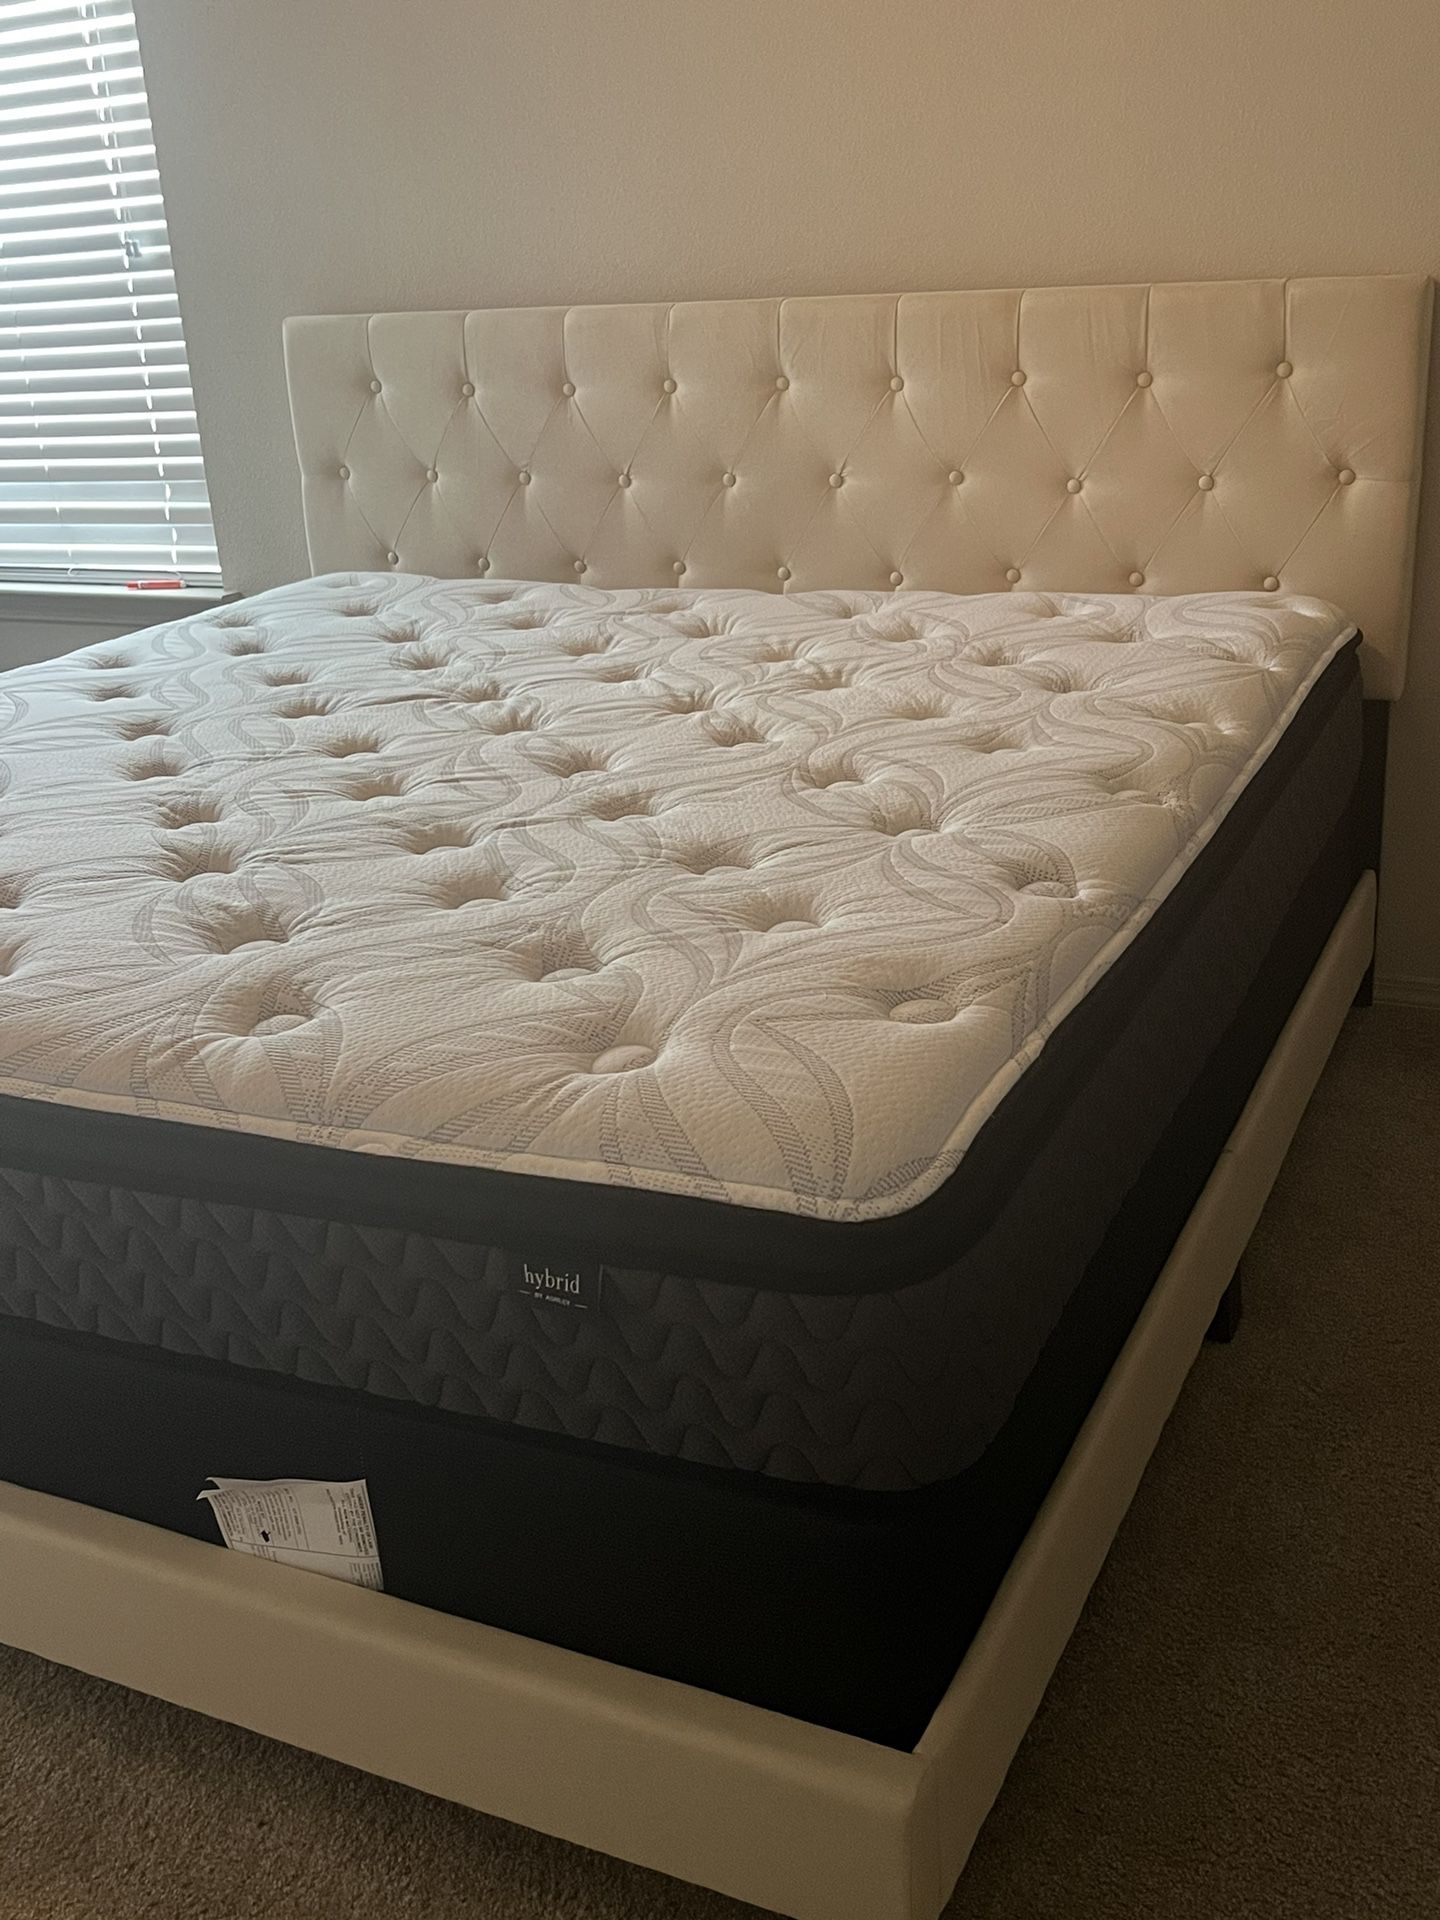 King Size Bed with Mattress